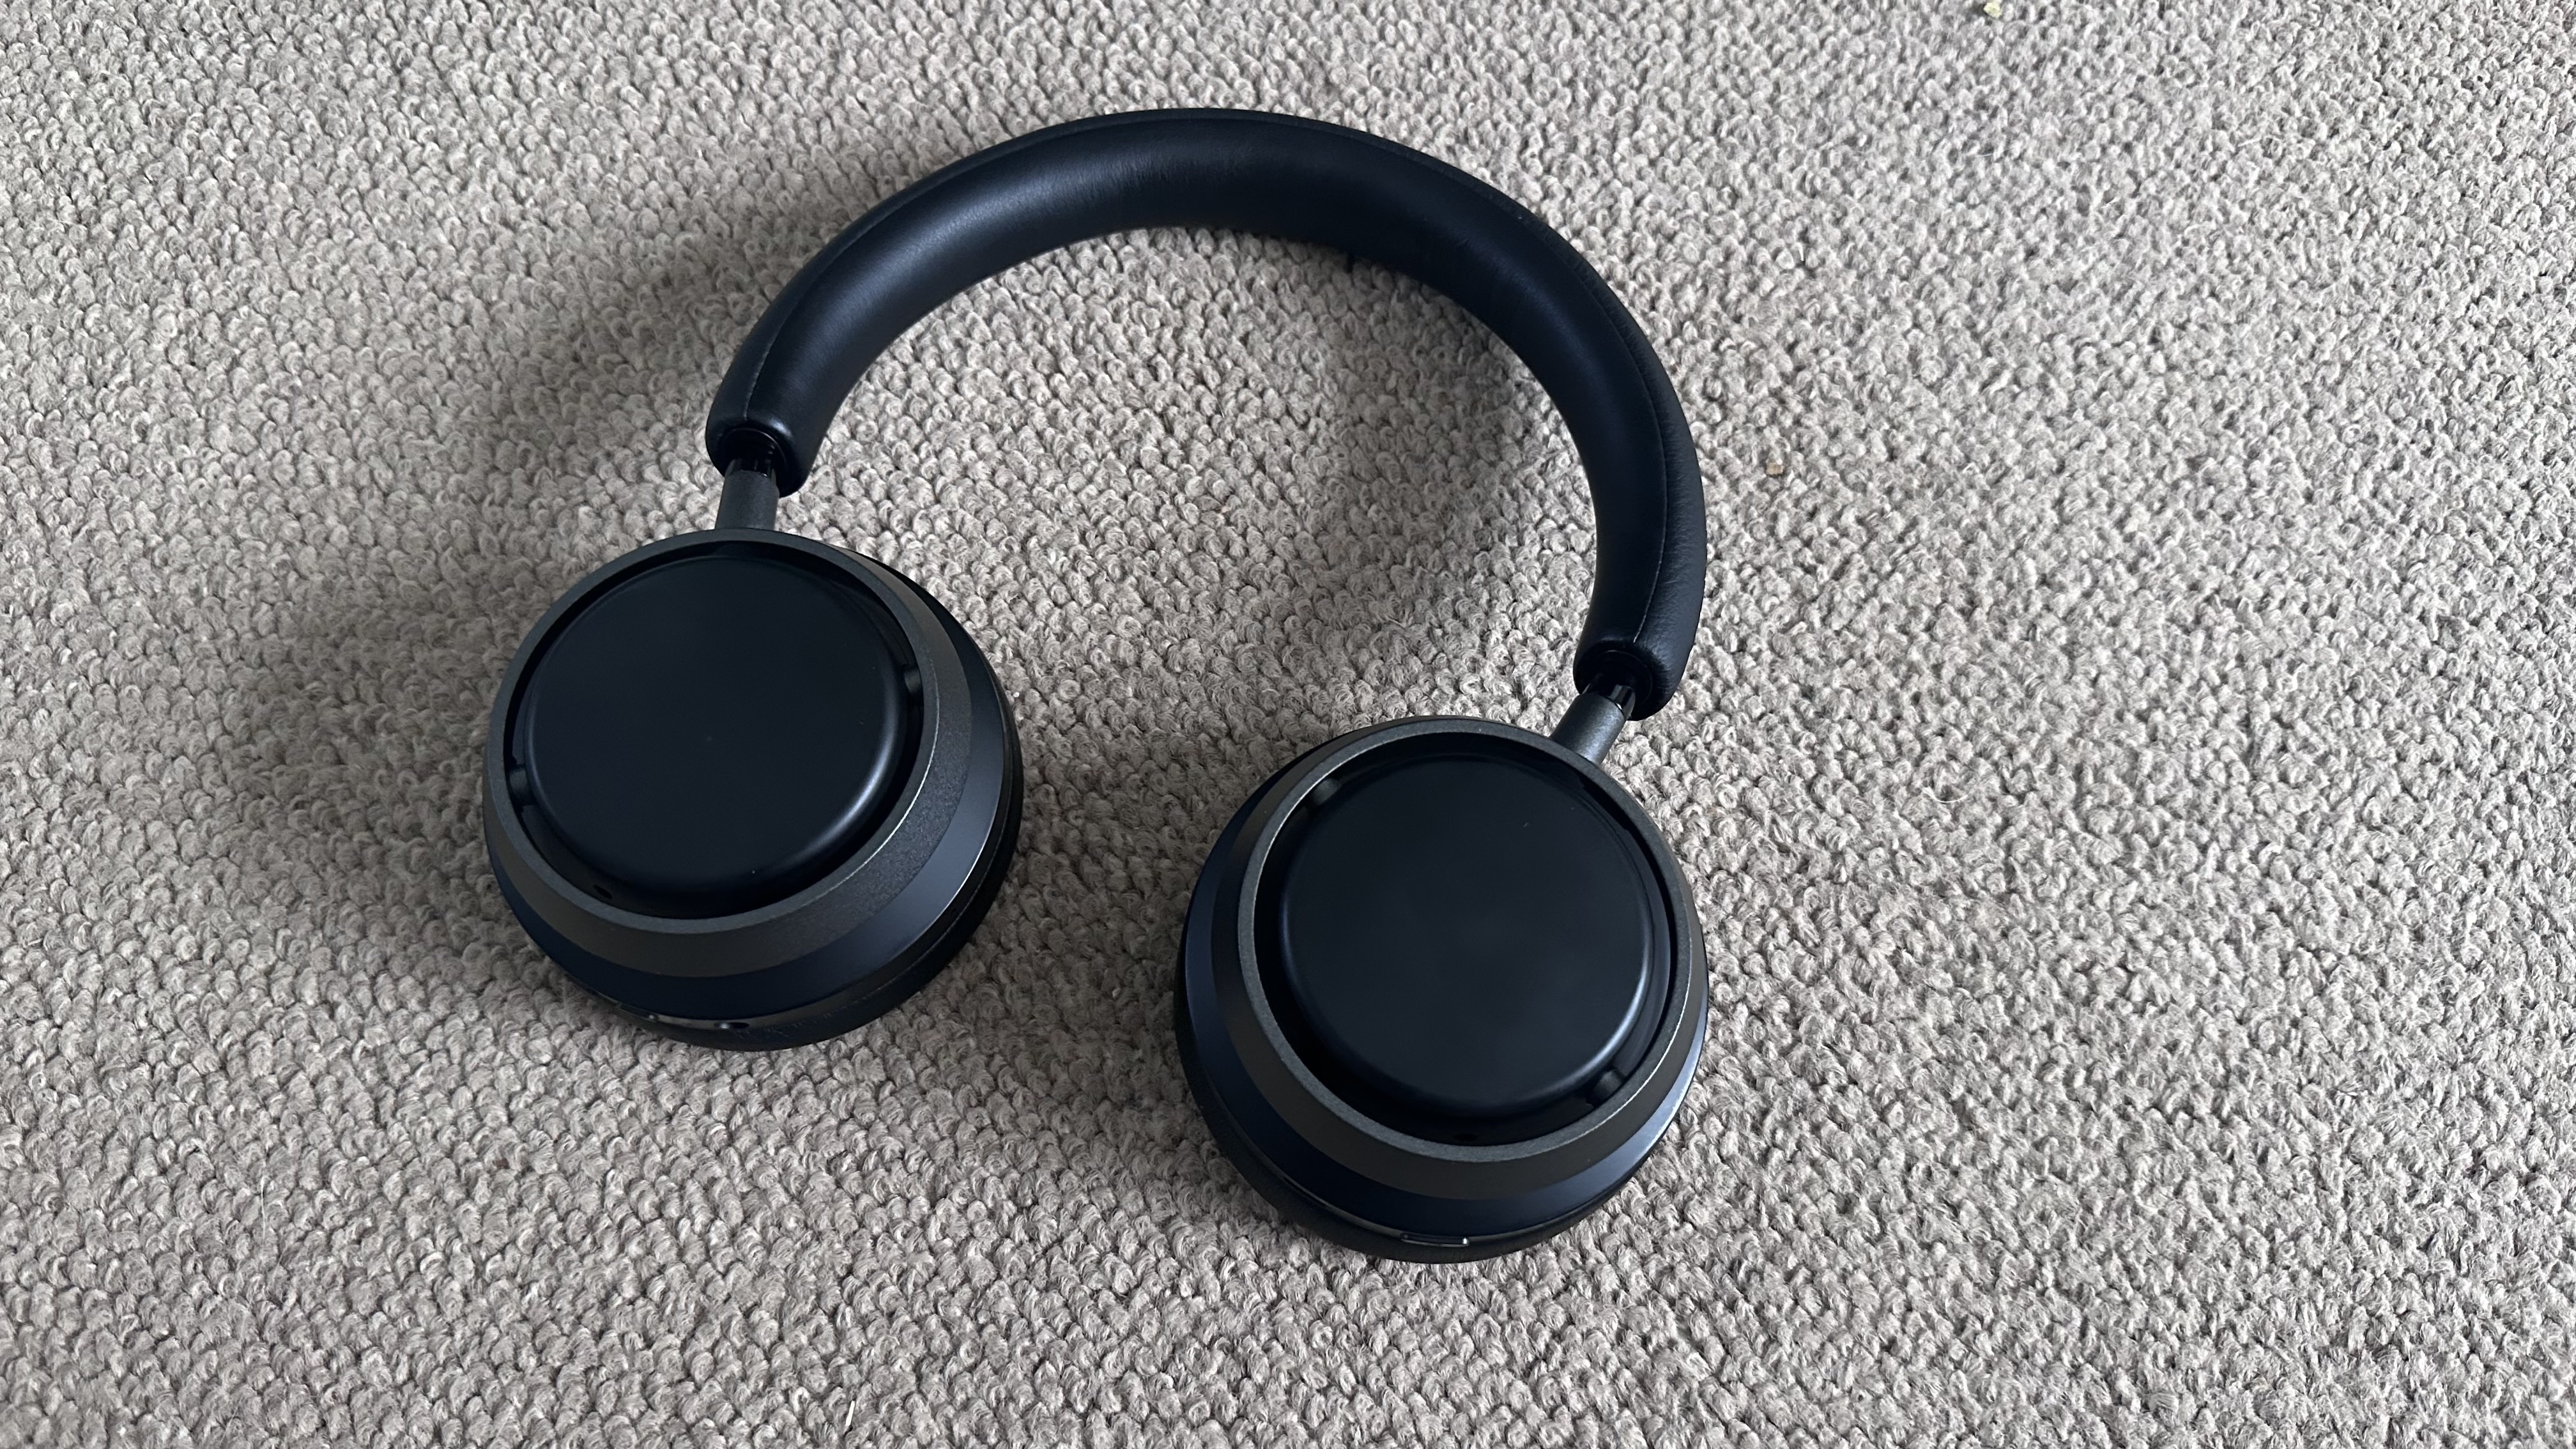 Sony WH-1000XM5 review: Great ANC and audio, questionable design (Updated)  